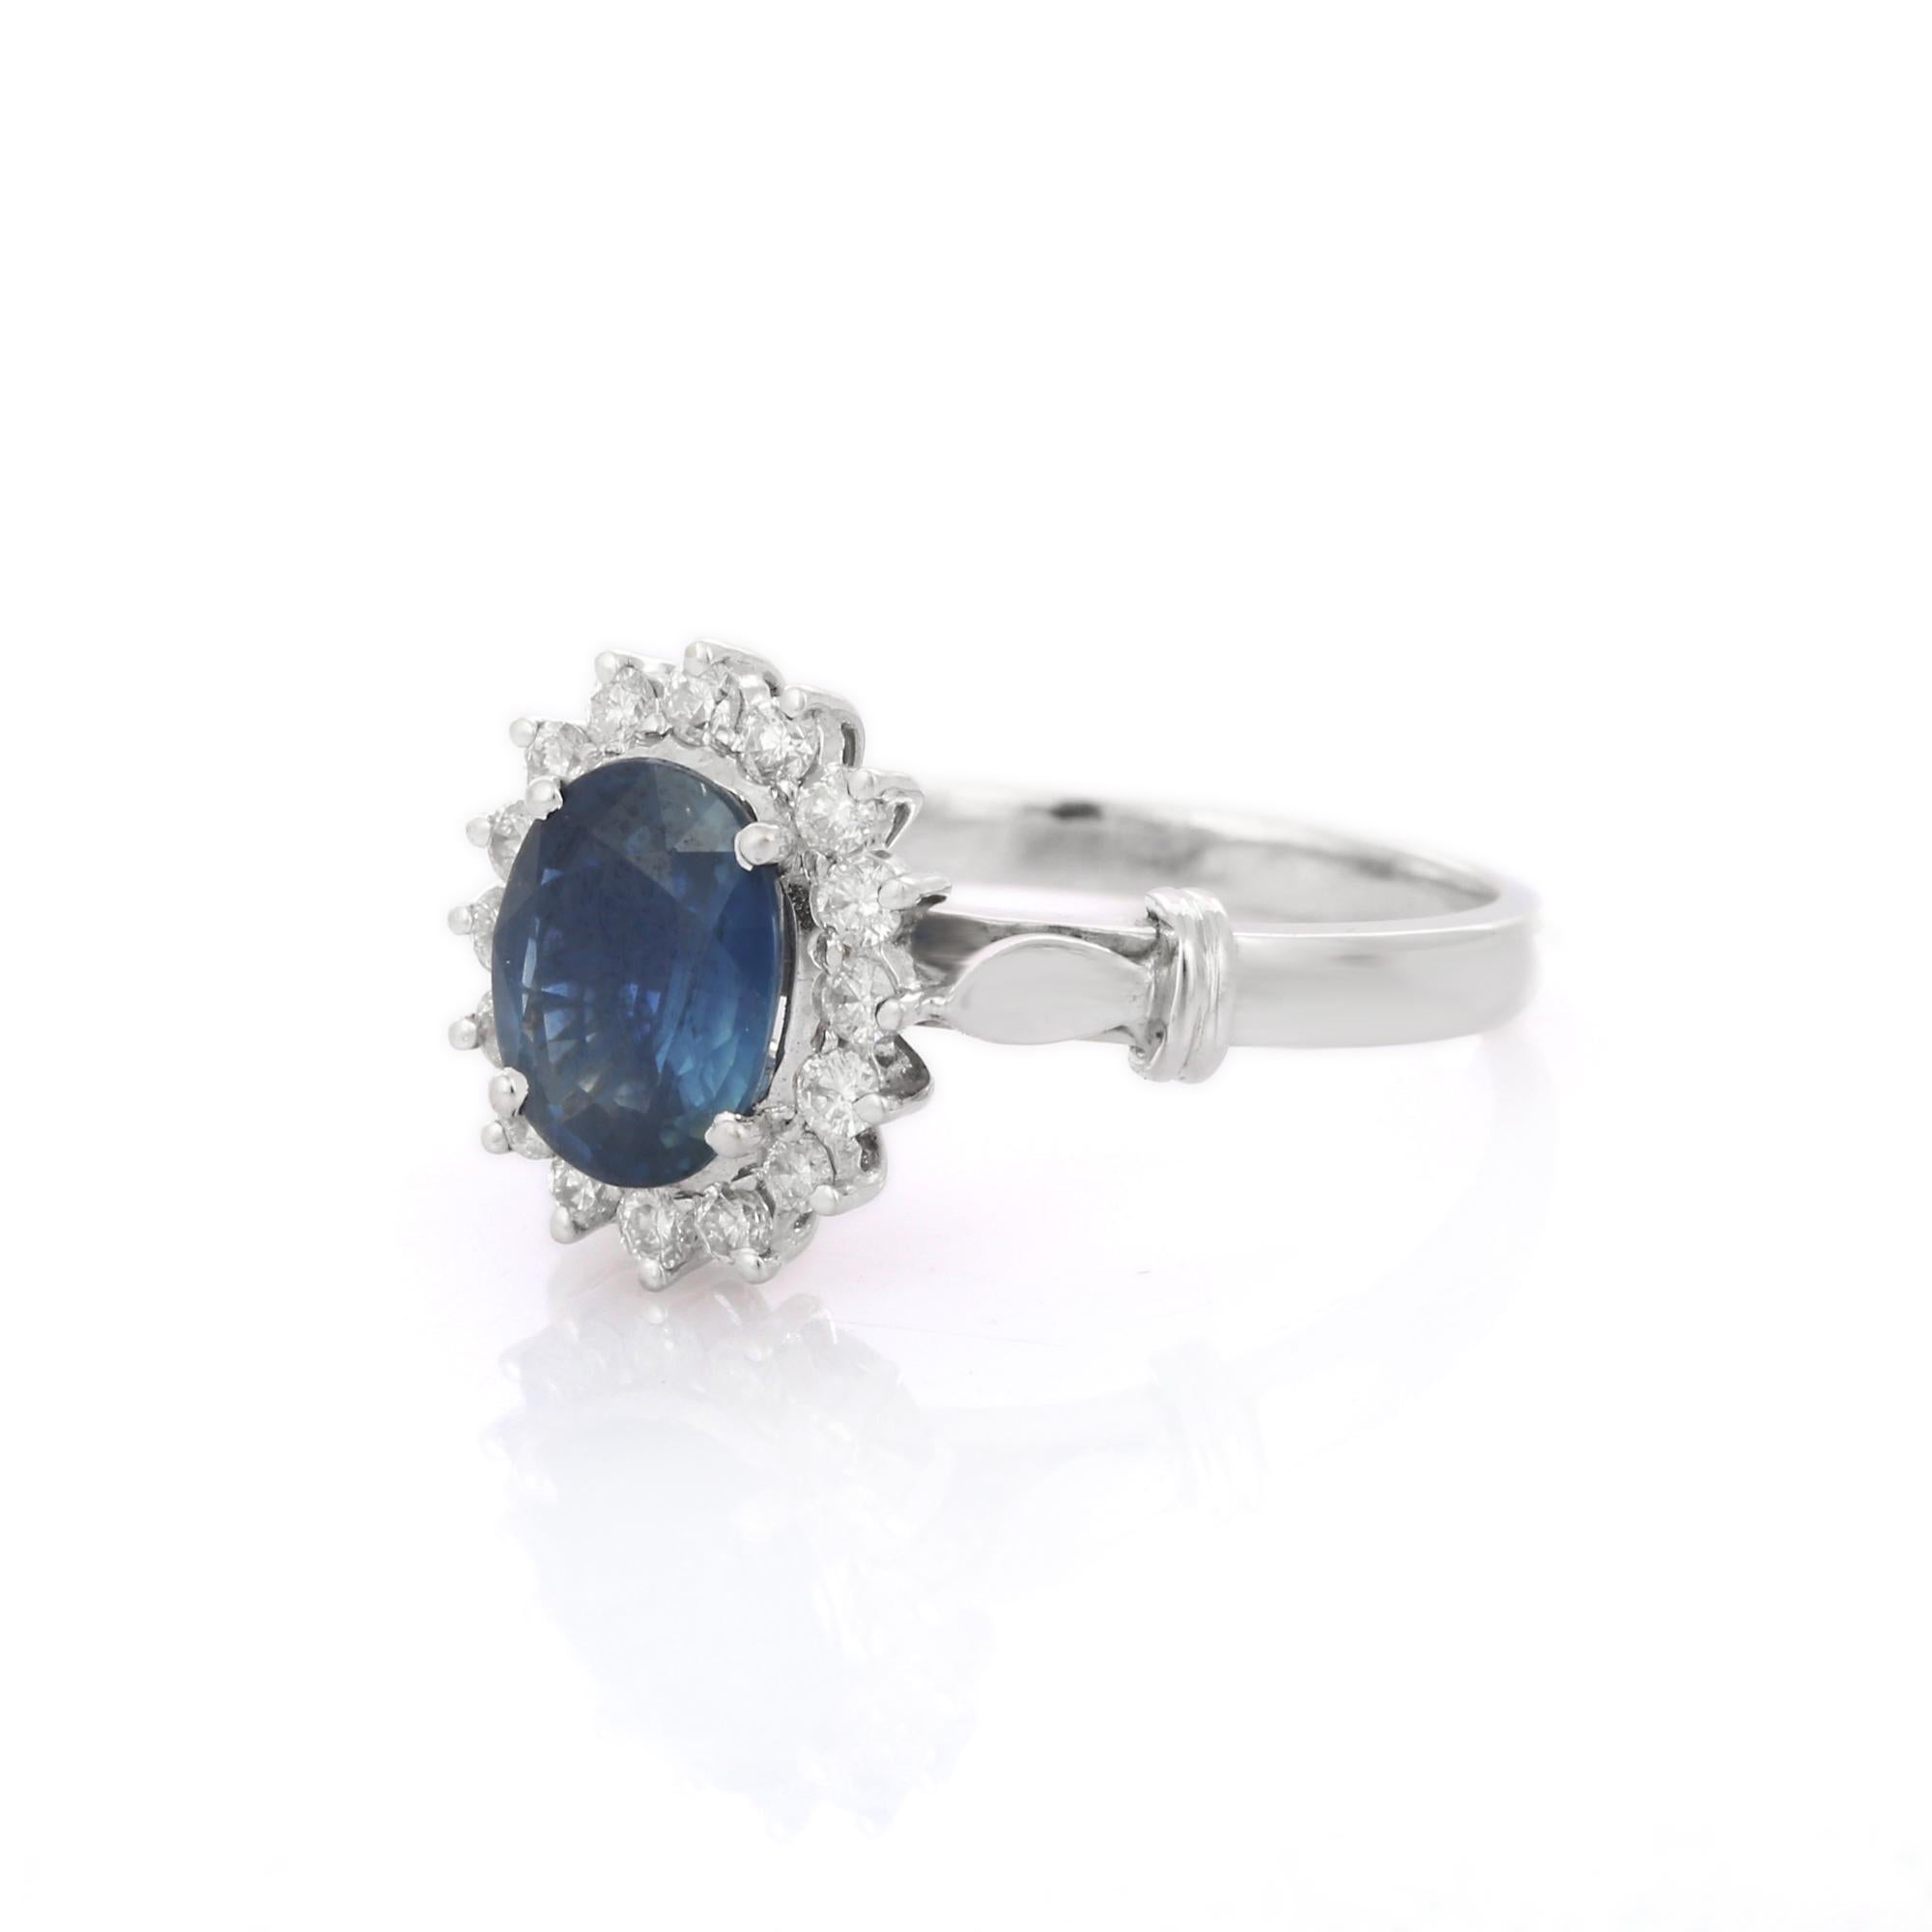 For Sale:  Royal Deep Blue Sapphire Betwixt Diamond Engagement Ring in 18K White Gold 2